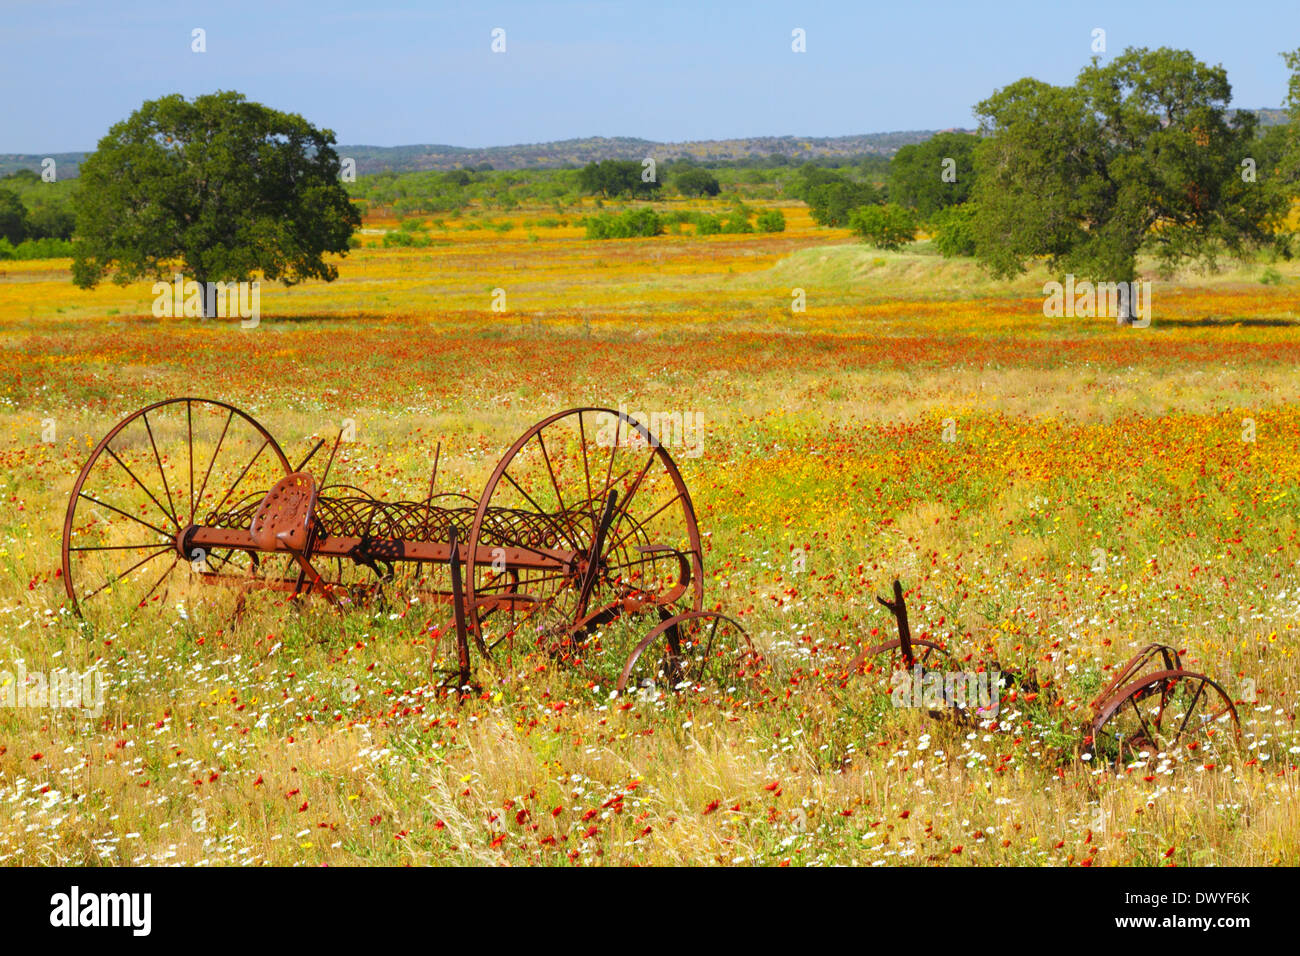 An old farm implement rests in a field of spring wildflowers in the Texas hill country. Stock Photo